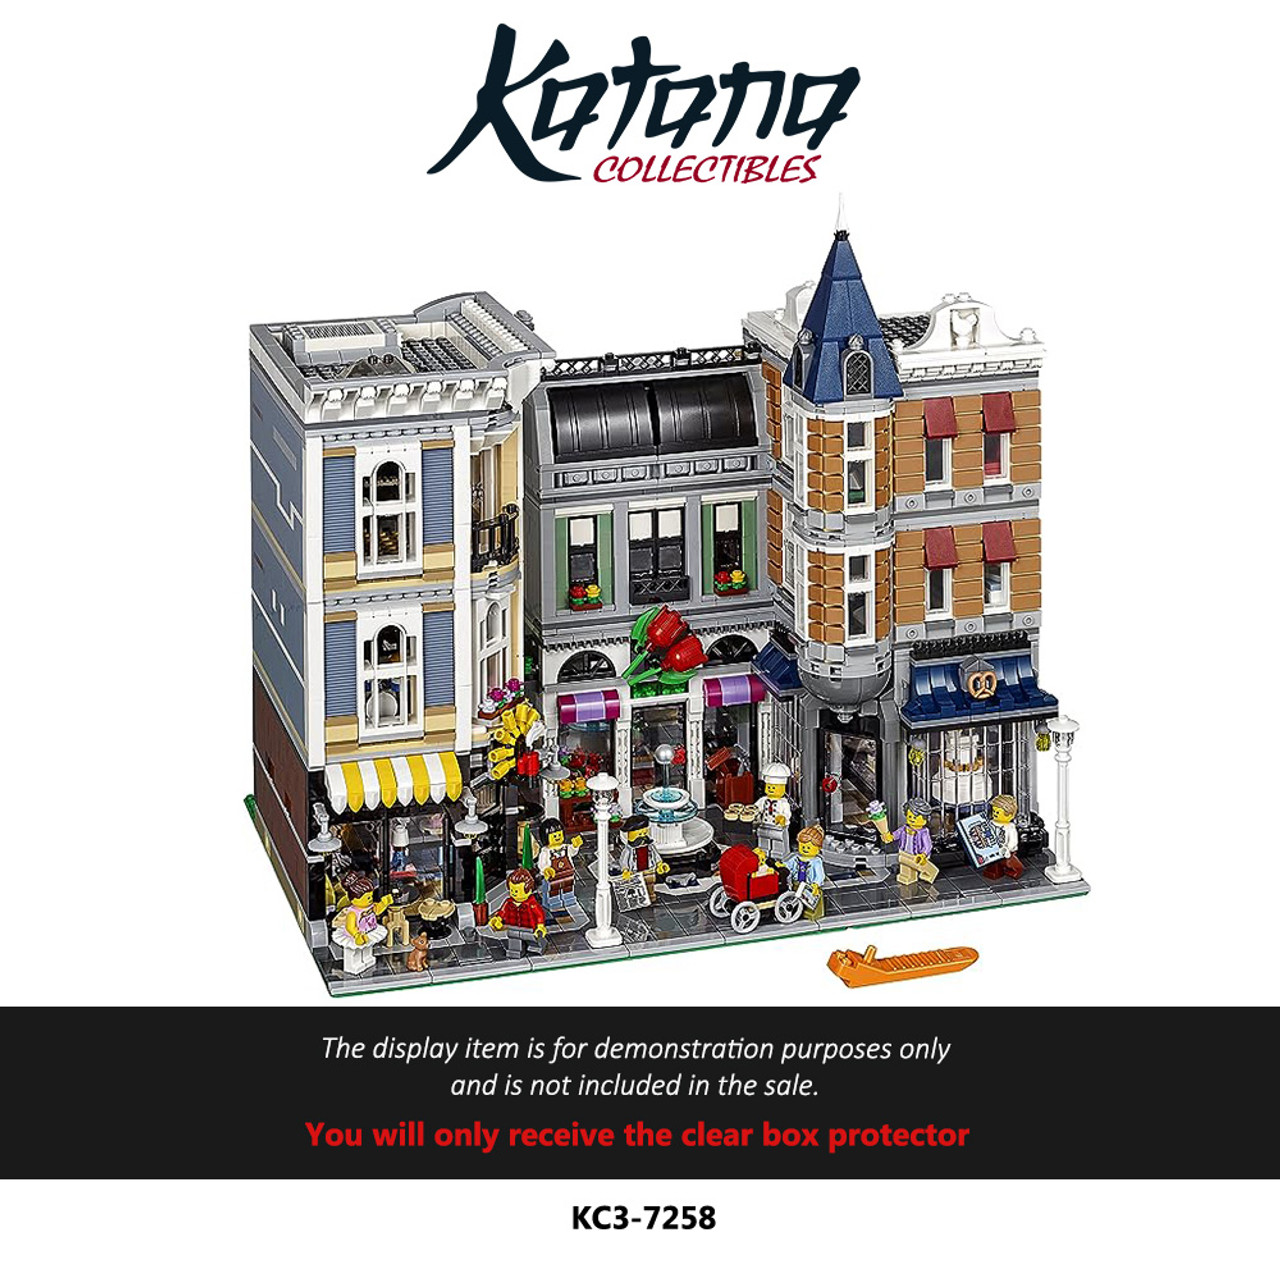 Katana Collectibles Protector For Assembly Square 10255 Lego Modular Building, Assembled